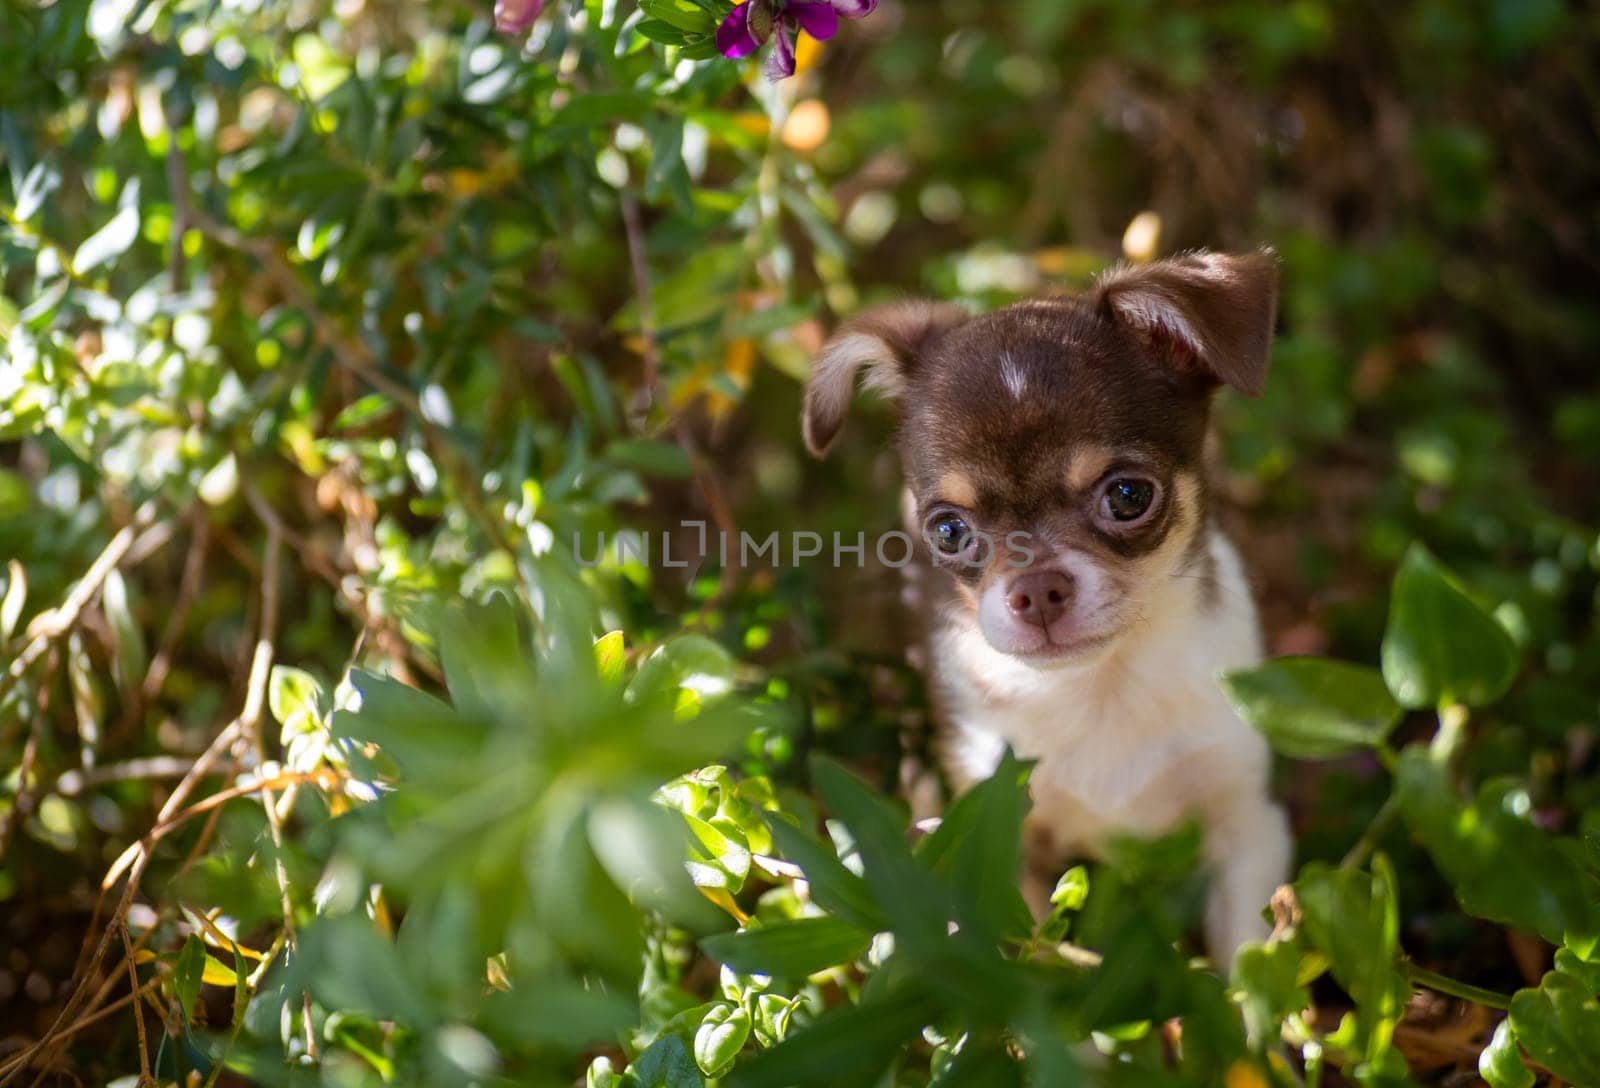 A curious Chihuahua puppy embarks on a garden adventure, navigating through the greenery with a backdrop of sunlight filtering through the trees.